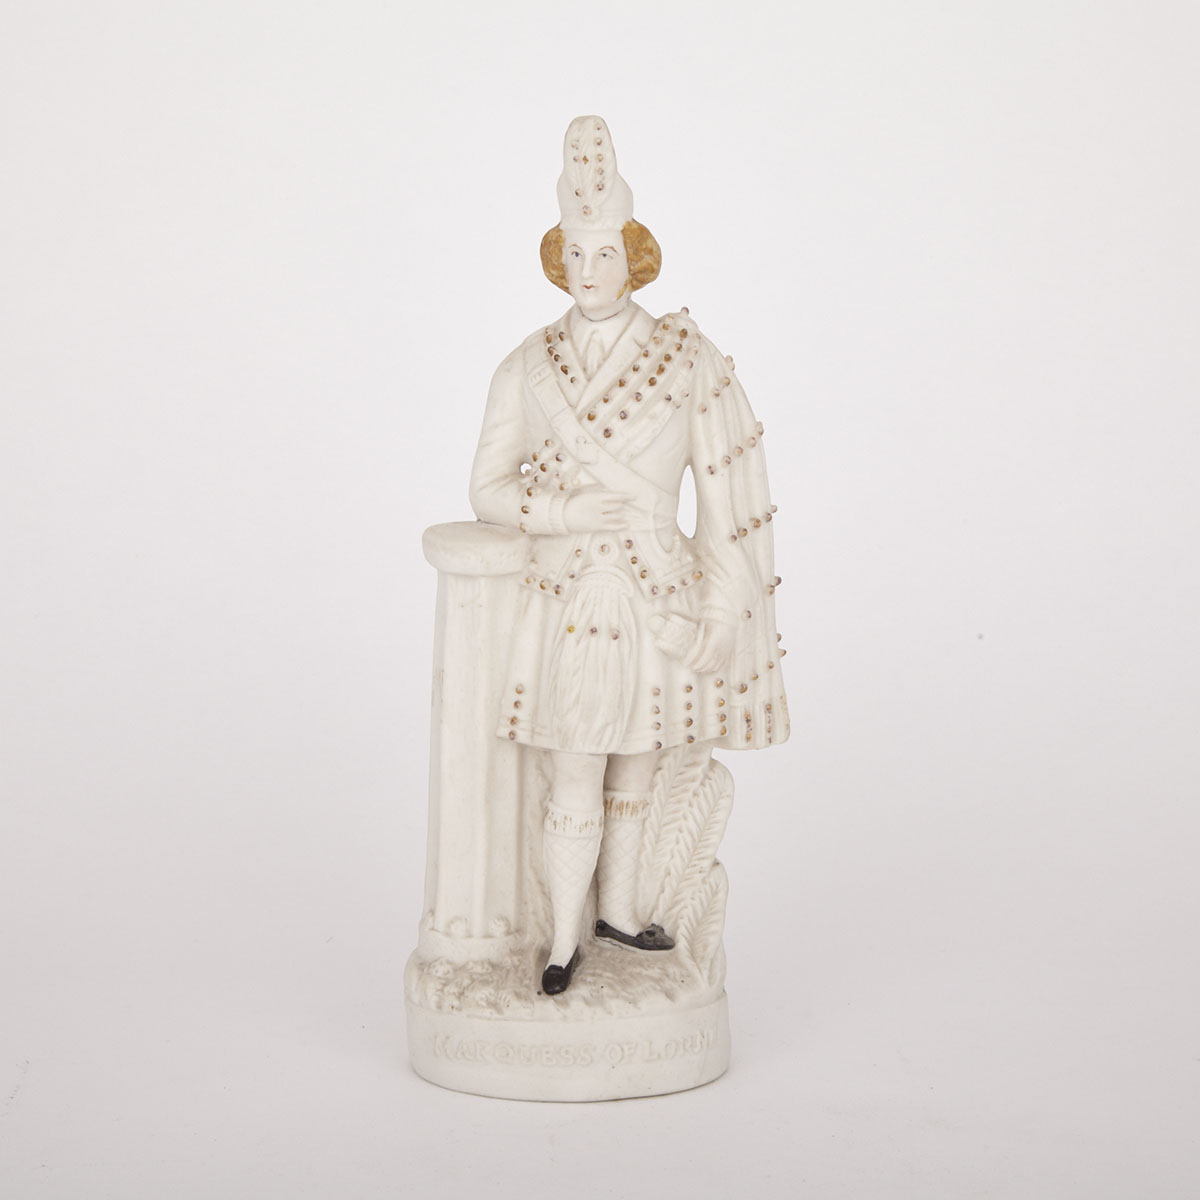 Parian Figure of the Marquess of Lorne, c.1870